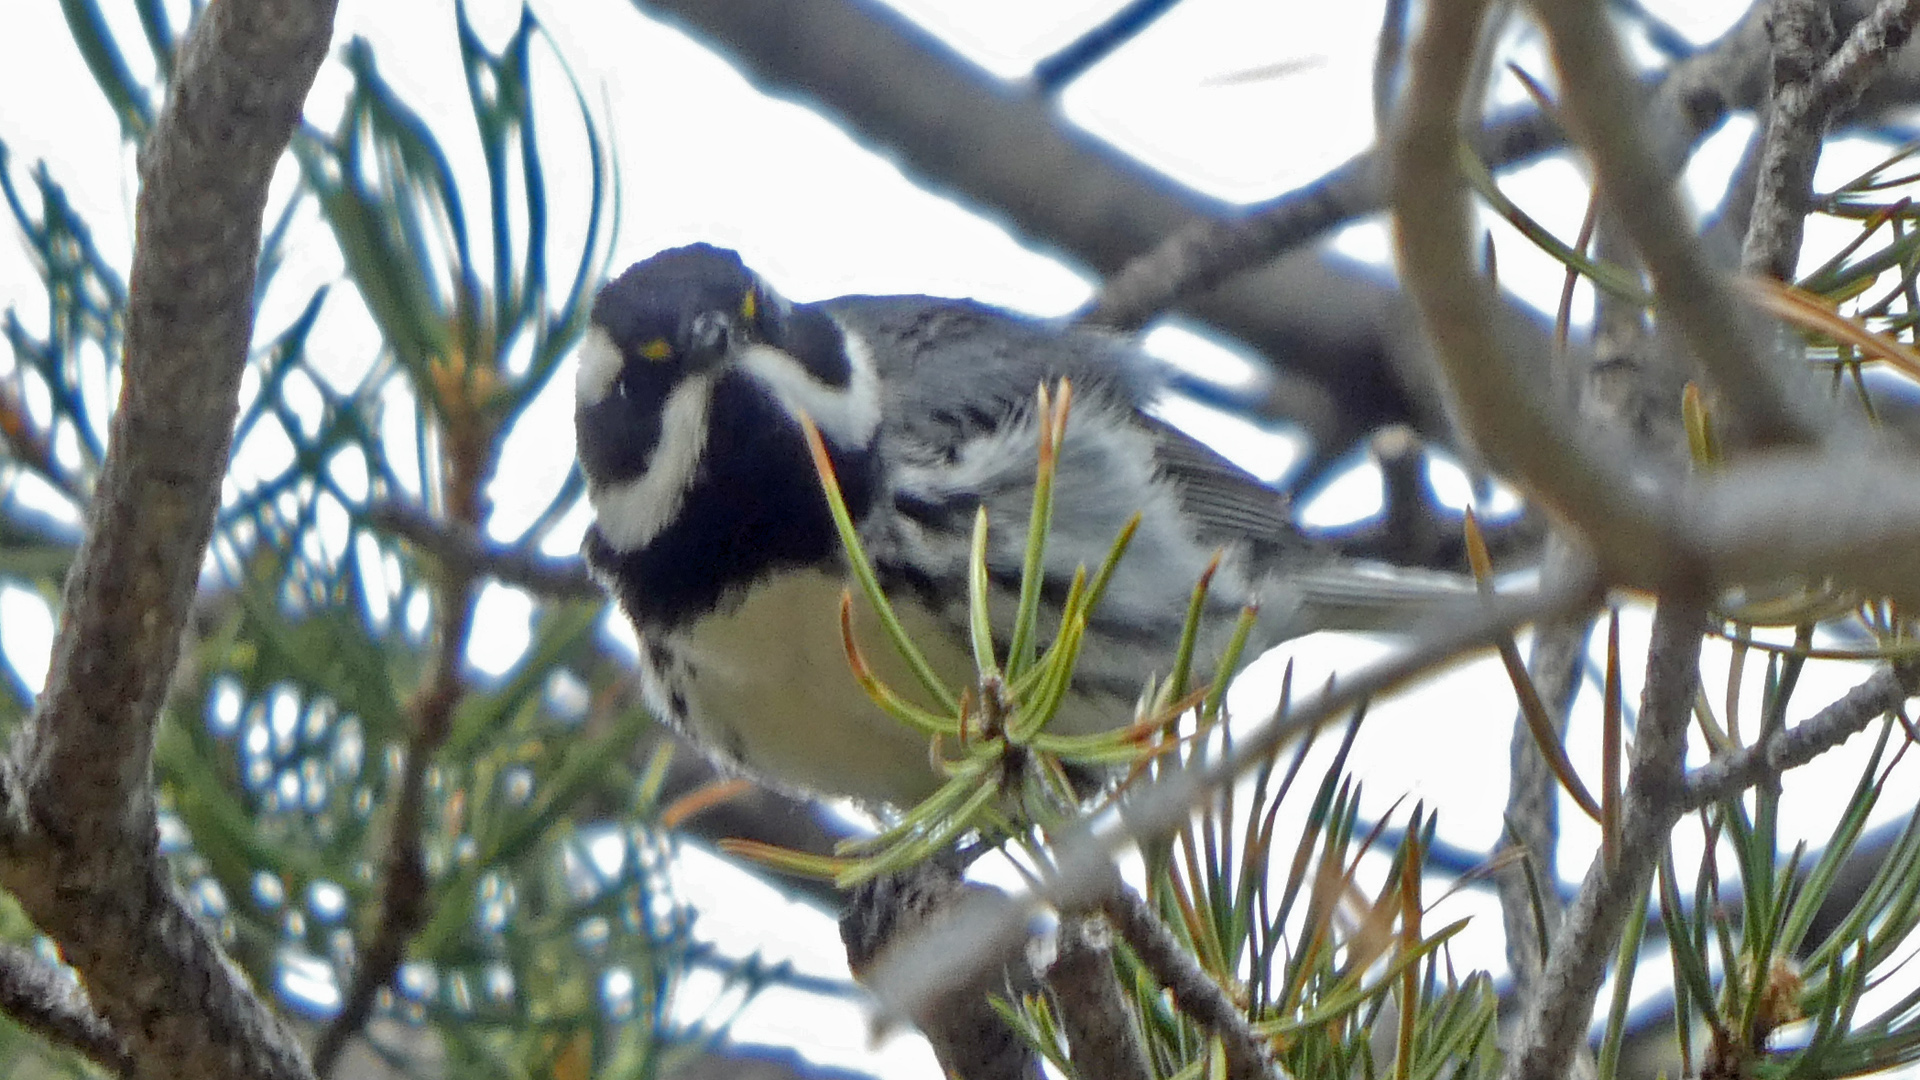 Male, Sandia Mountains, May 2020